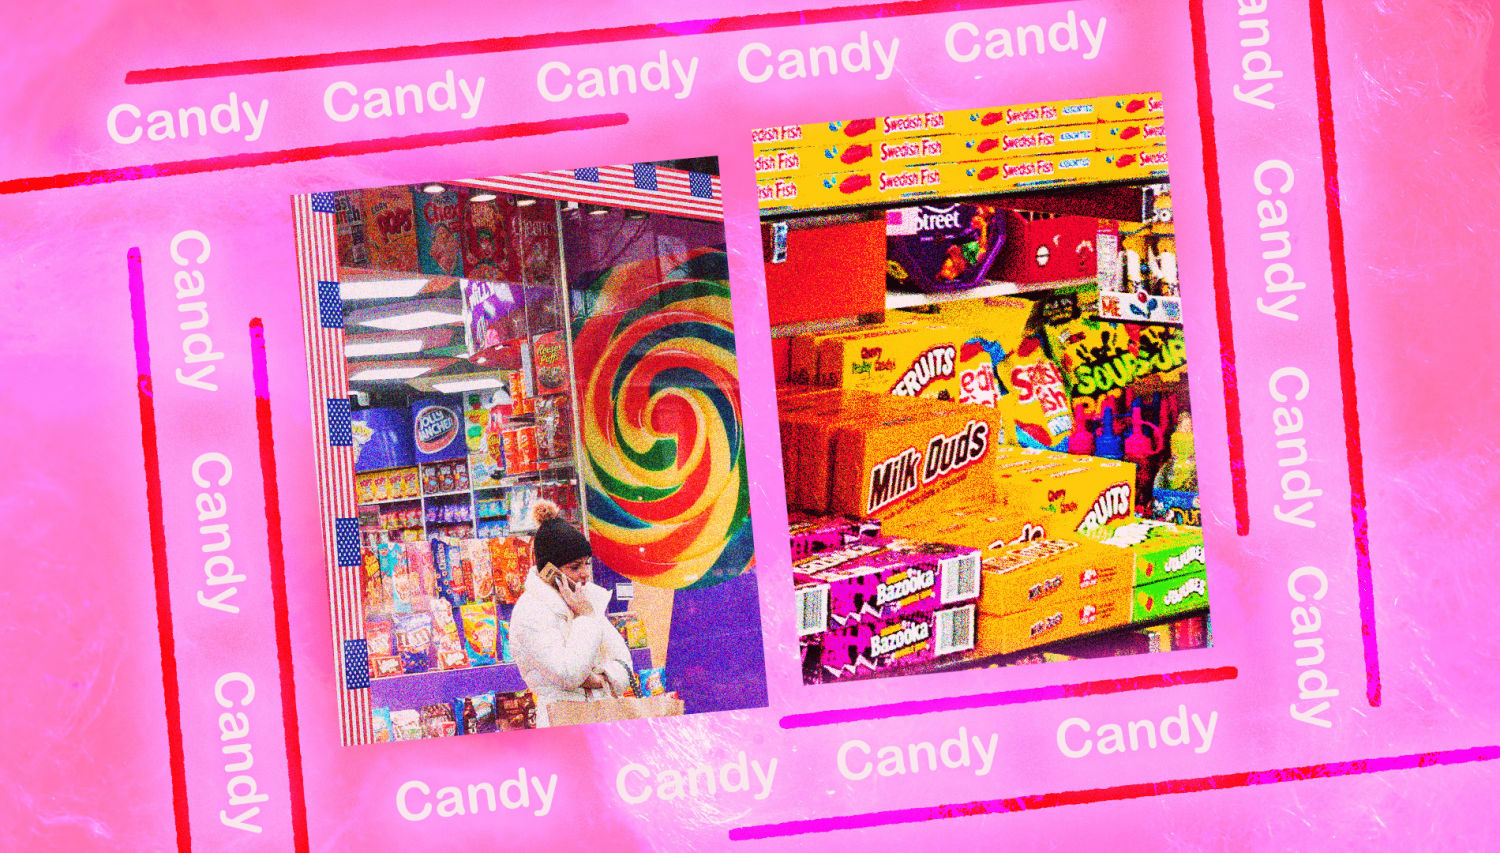 Behind the shelves of candy, a darker side to London’s mysterious American candy stores